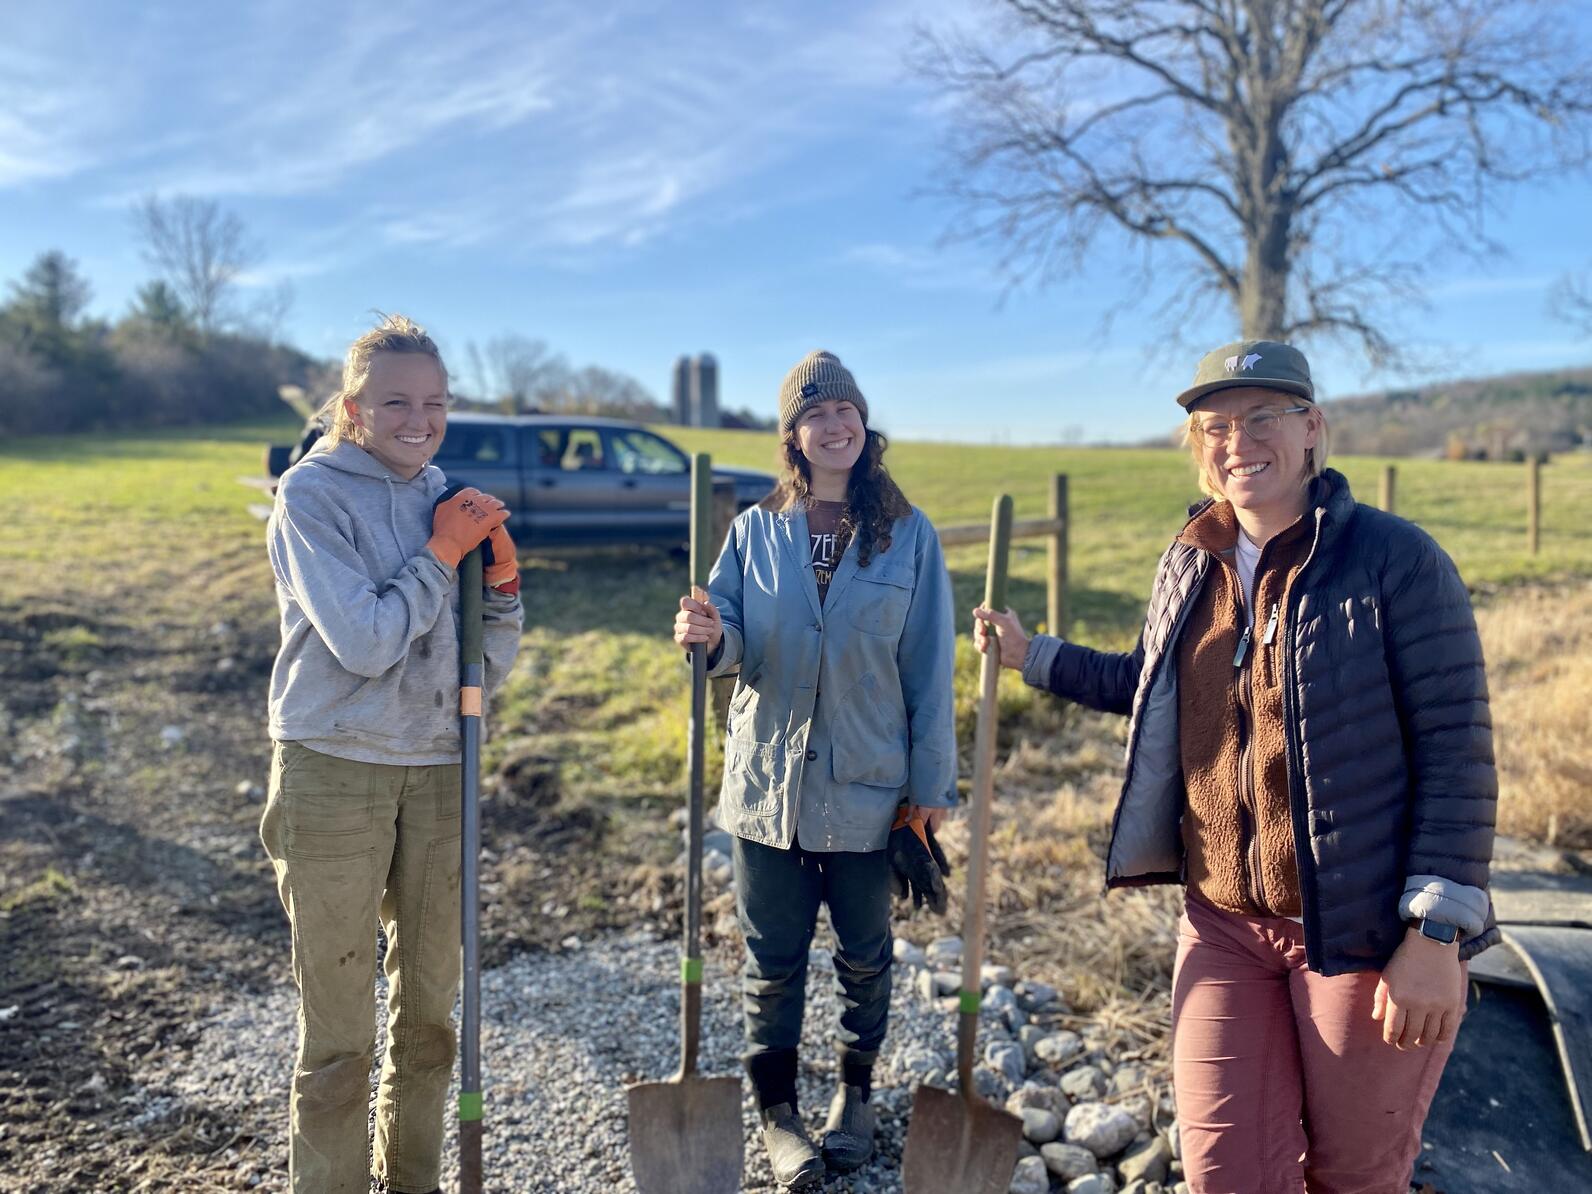 A group of three people holding shovels